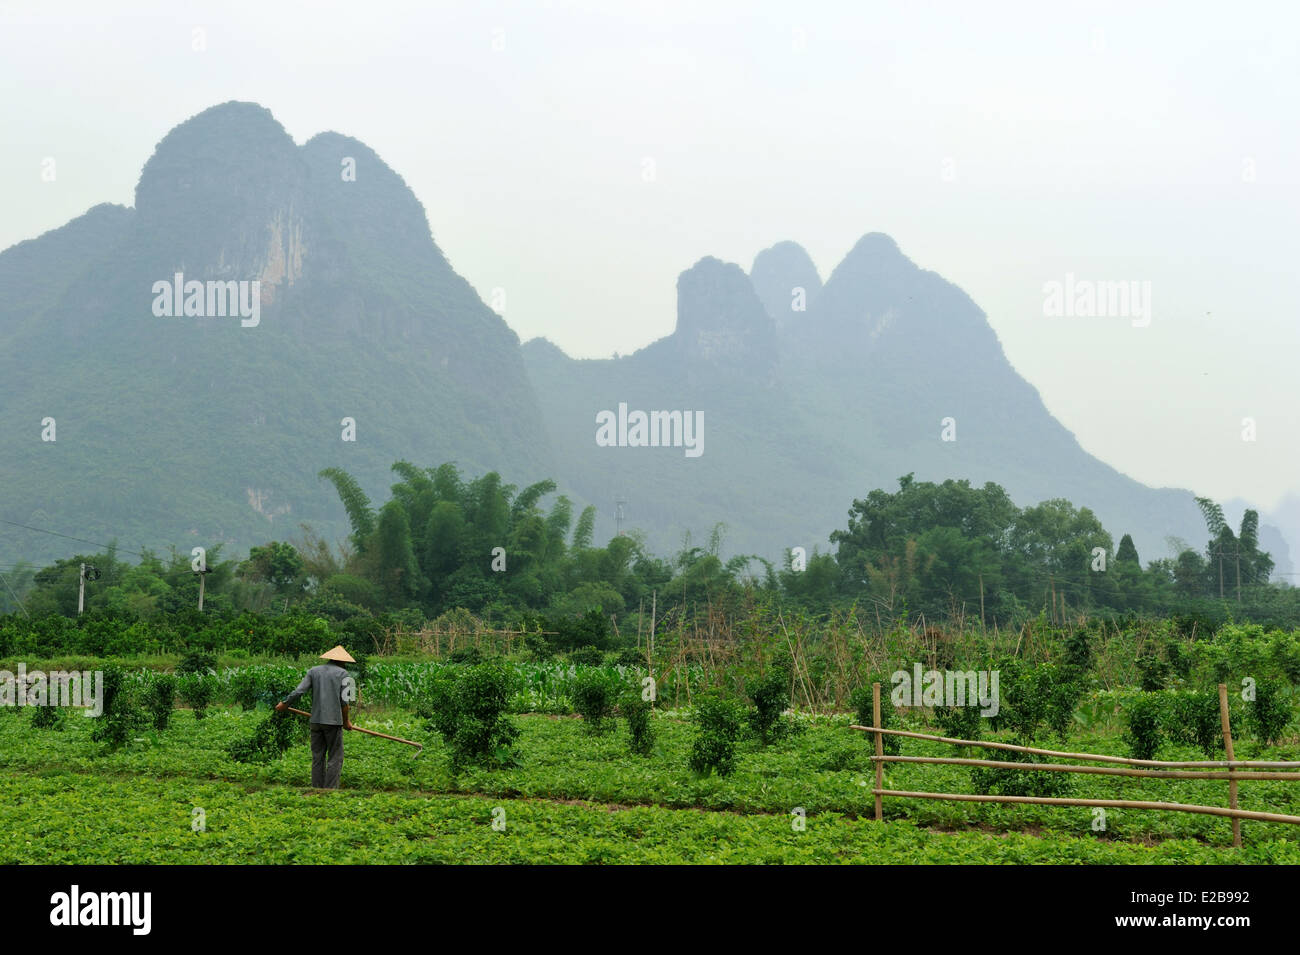 China, Guangxi province, Guilin region, Karst mountain and rice field landscape around Yangshuo Stock Photo